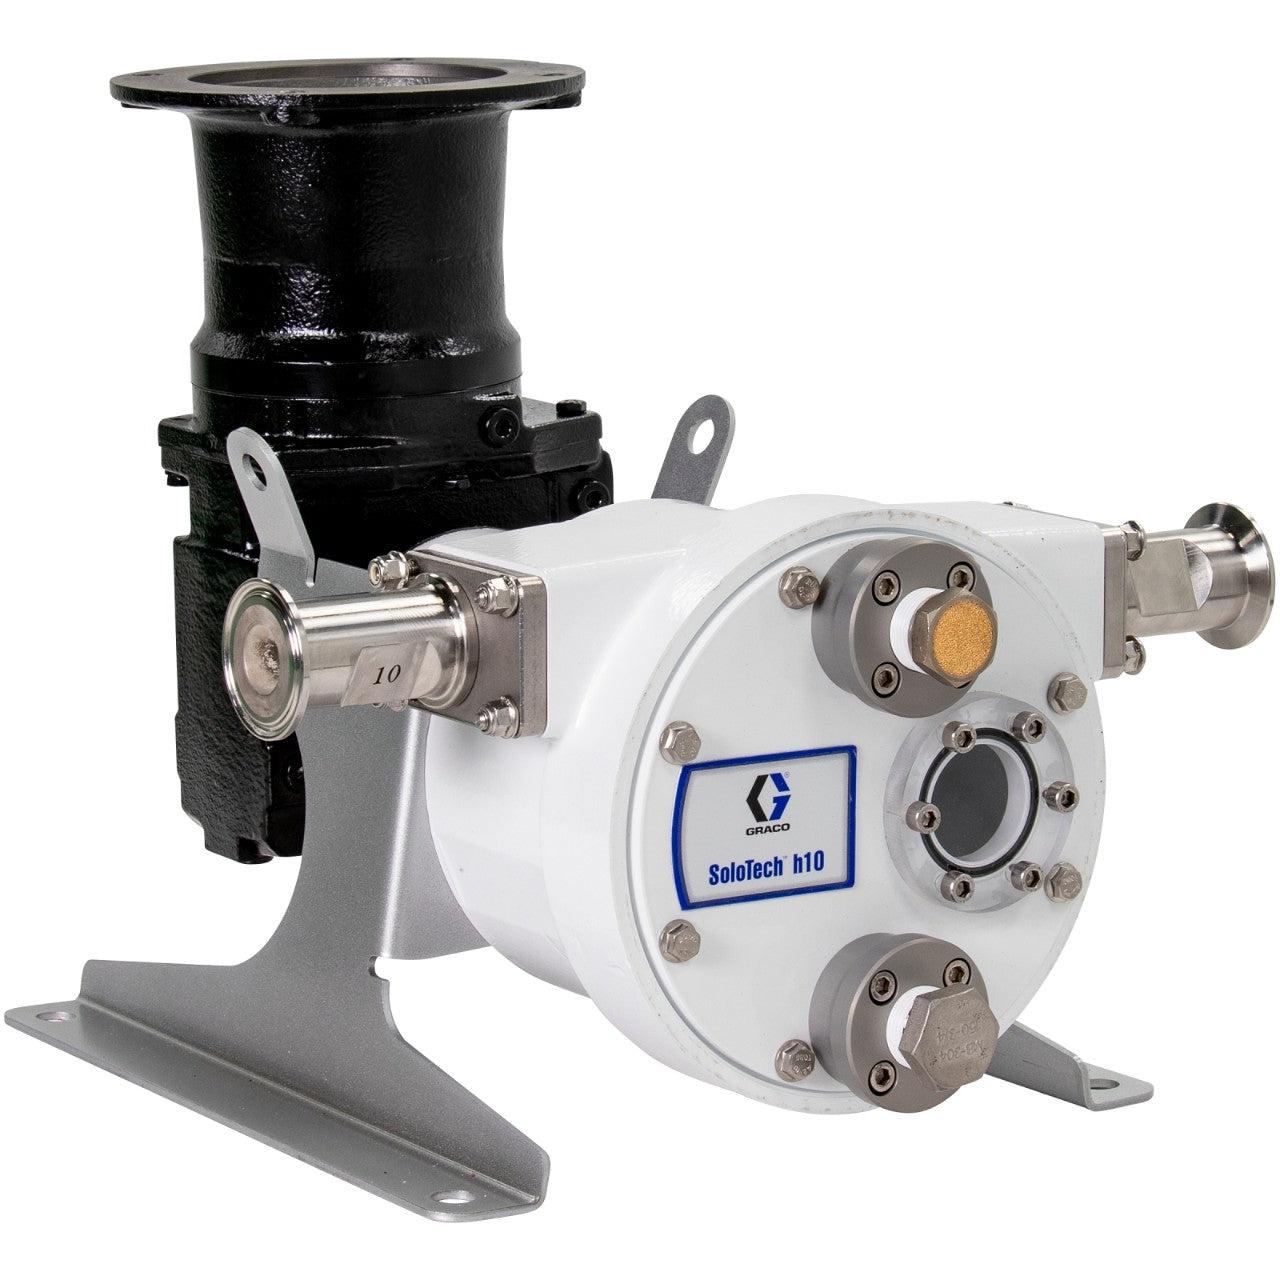 SoloTechª h10 Peristaltic Pump, Med-speed gear reducer no motor, IEC, FDA Nitrile Hose, SST Sanitary Clamp Barb